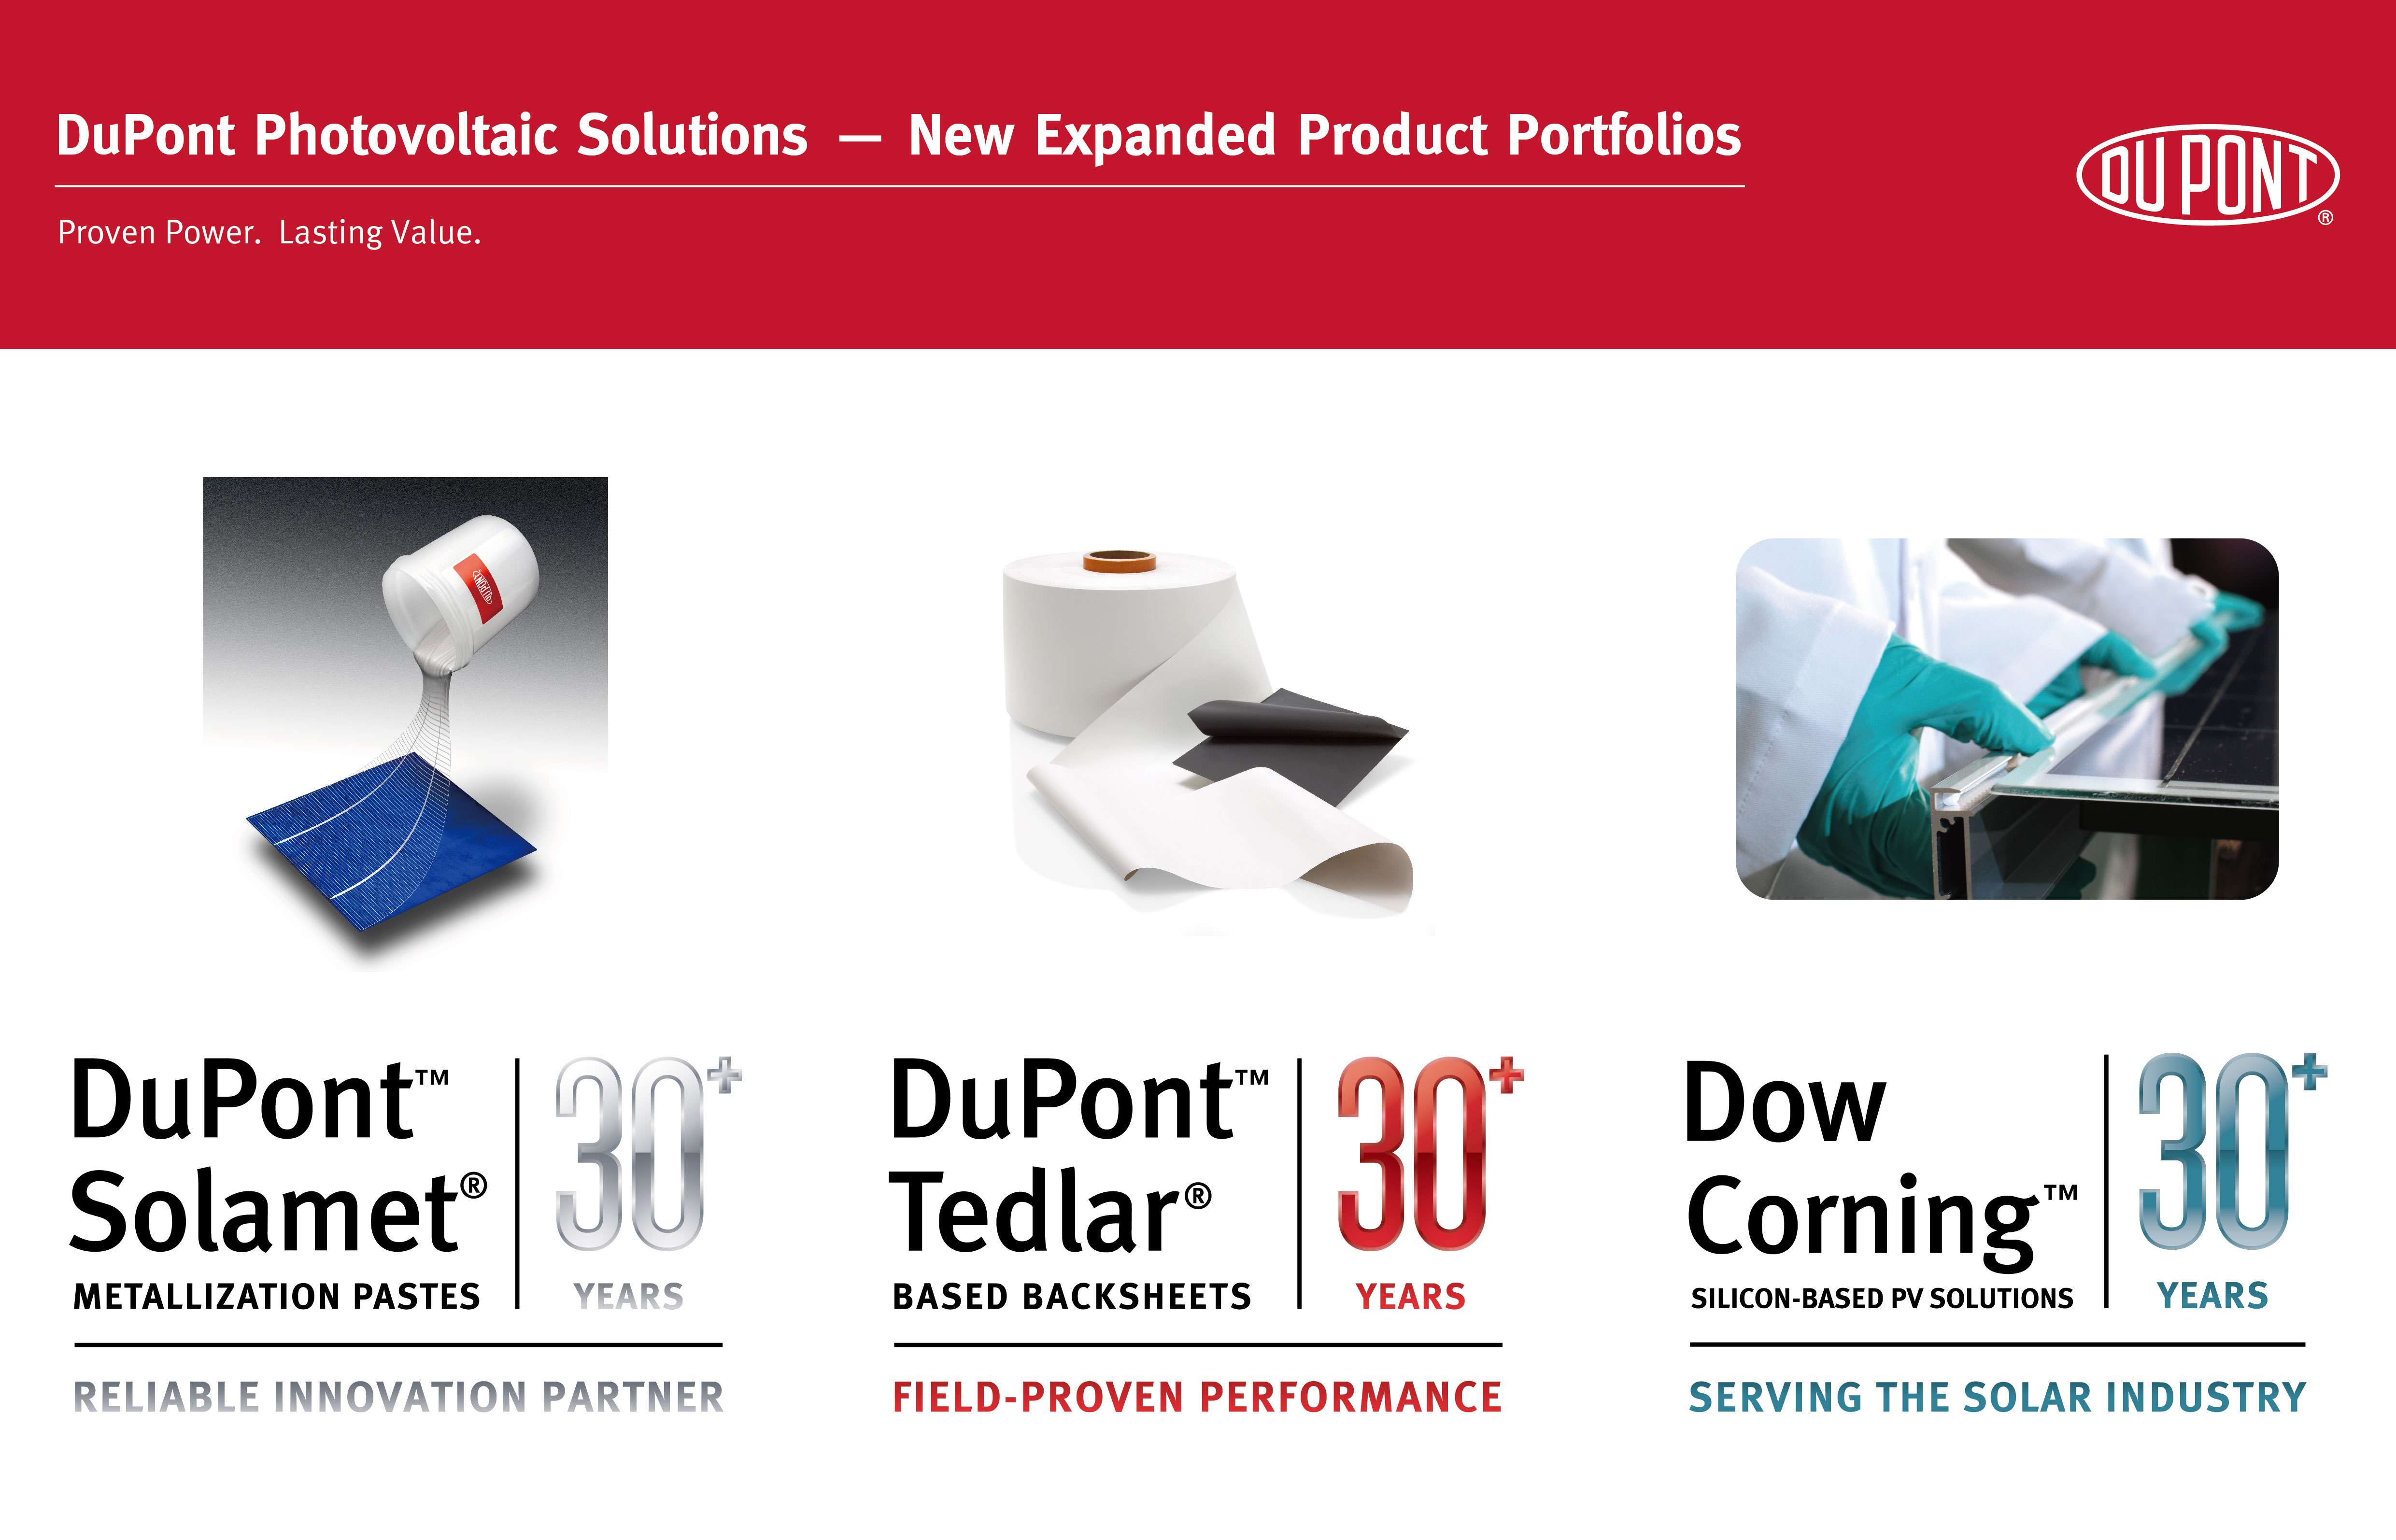 DuPont Photovoltaic Solutions Suite of Products